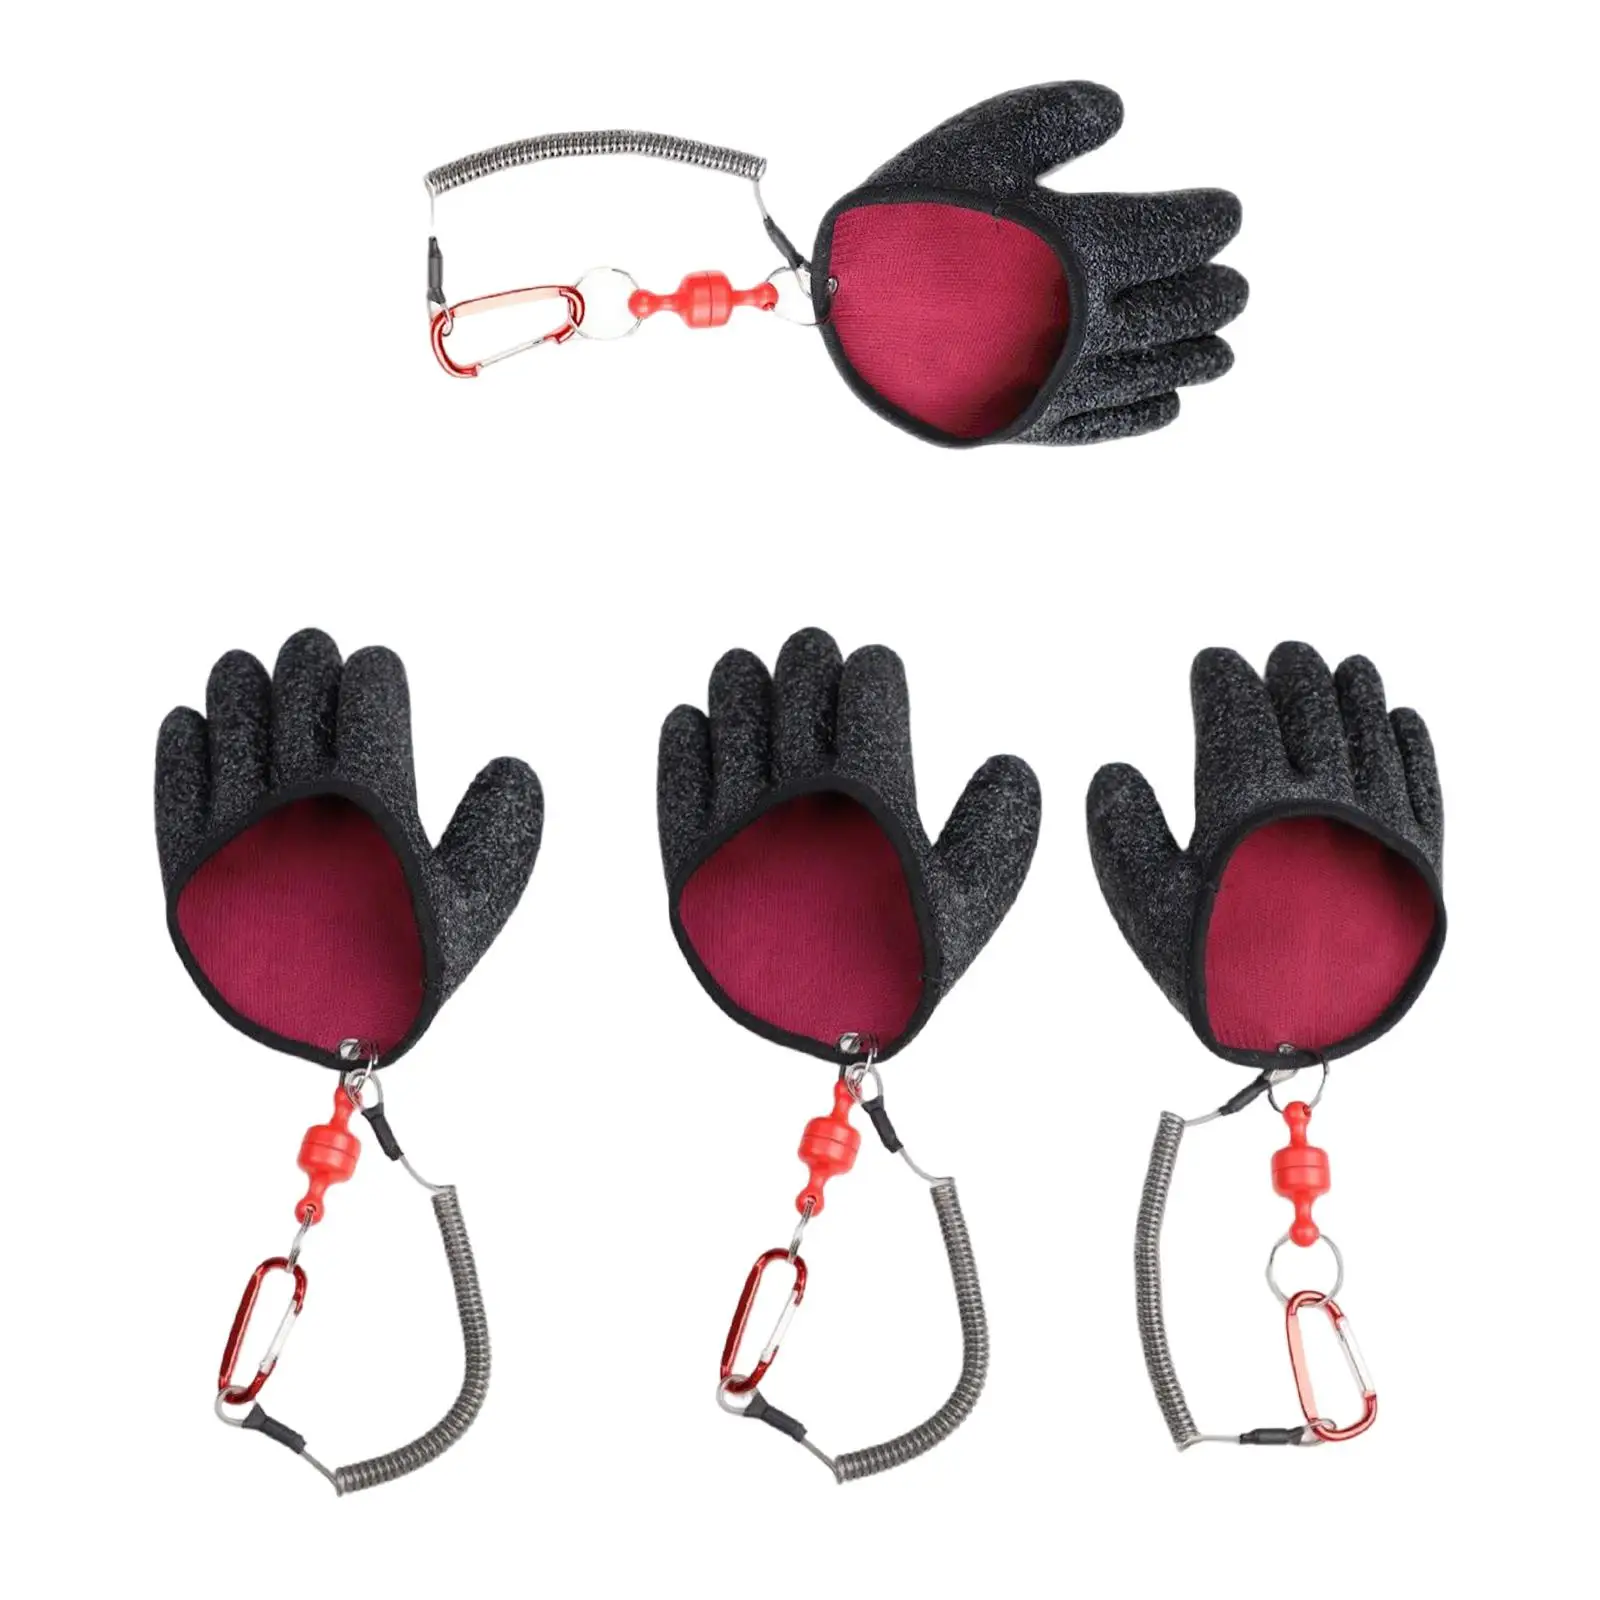 Fishing Gloves Nonslip Puncture Resistant Waterproof Fish Glove Cut Resistant for Handling Catch Fish Catching Fisherman